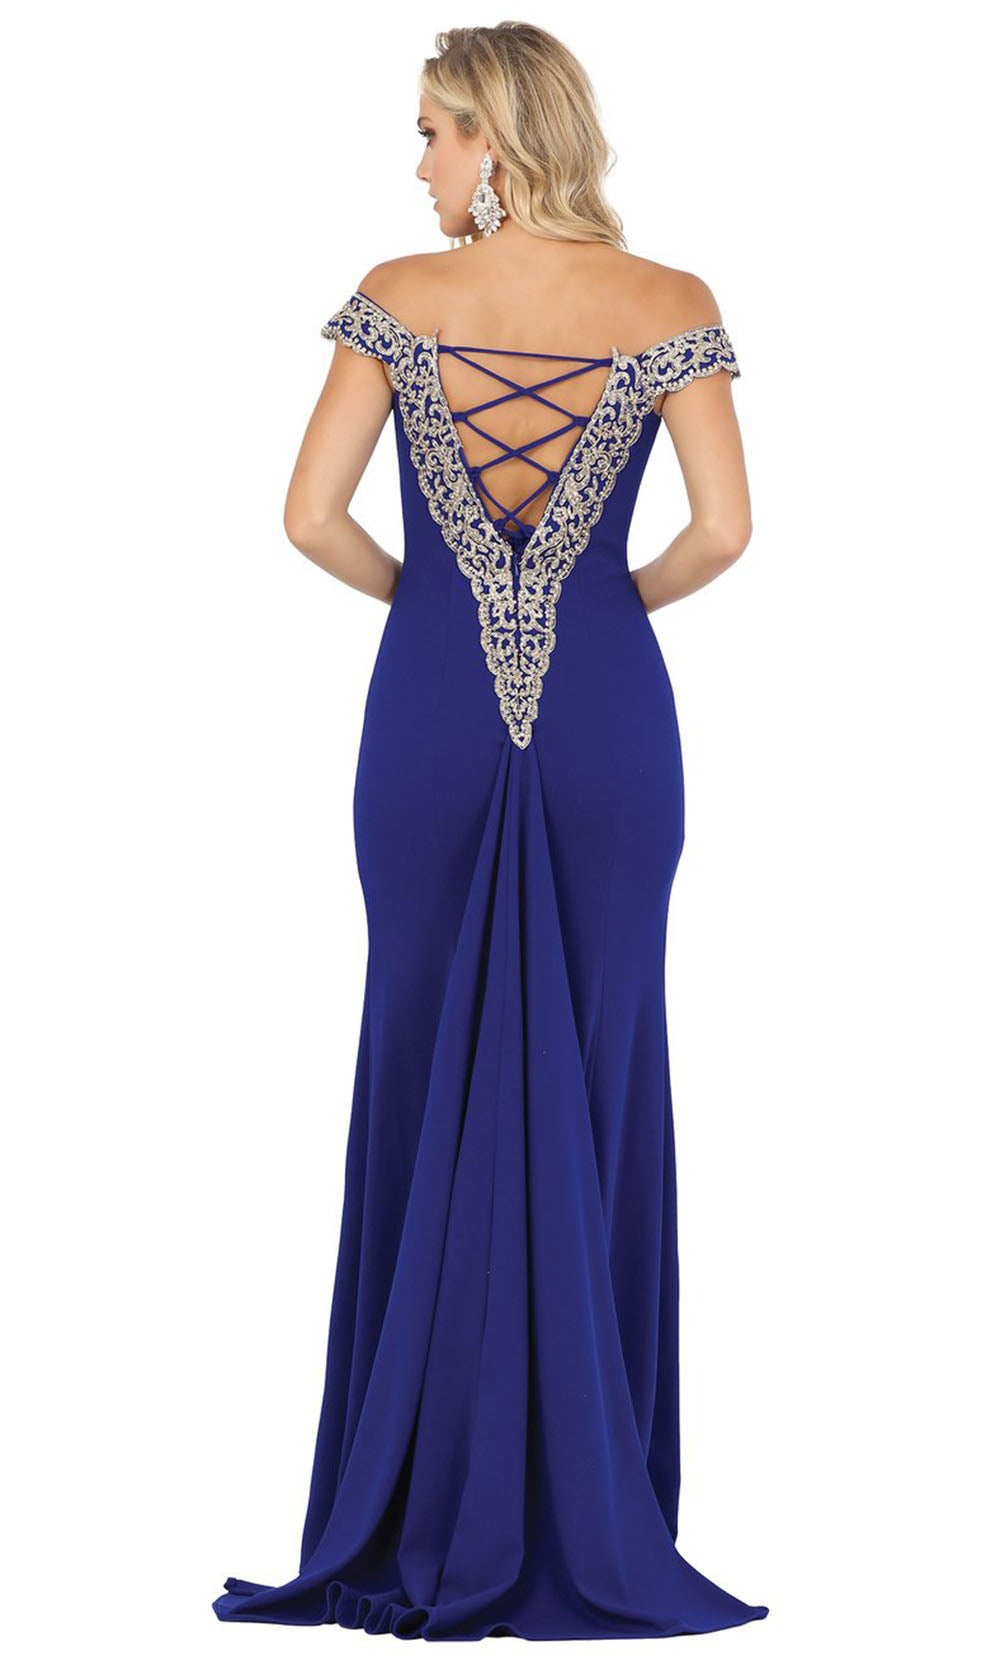 Dancing Queen - 4004 Lace Trim Off Shoulder High Slit Gown In Blue